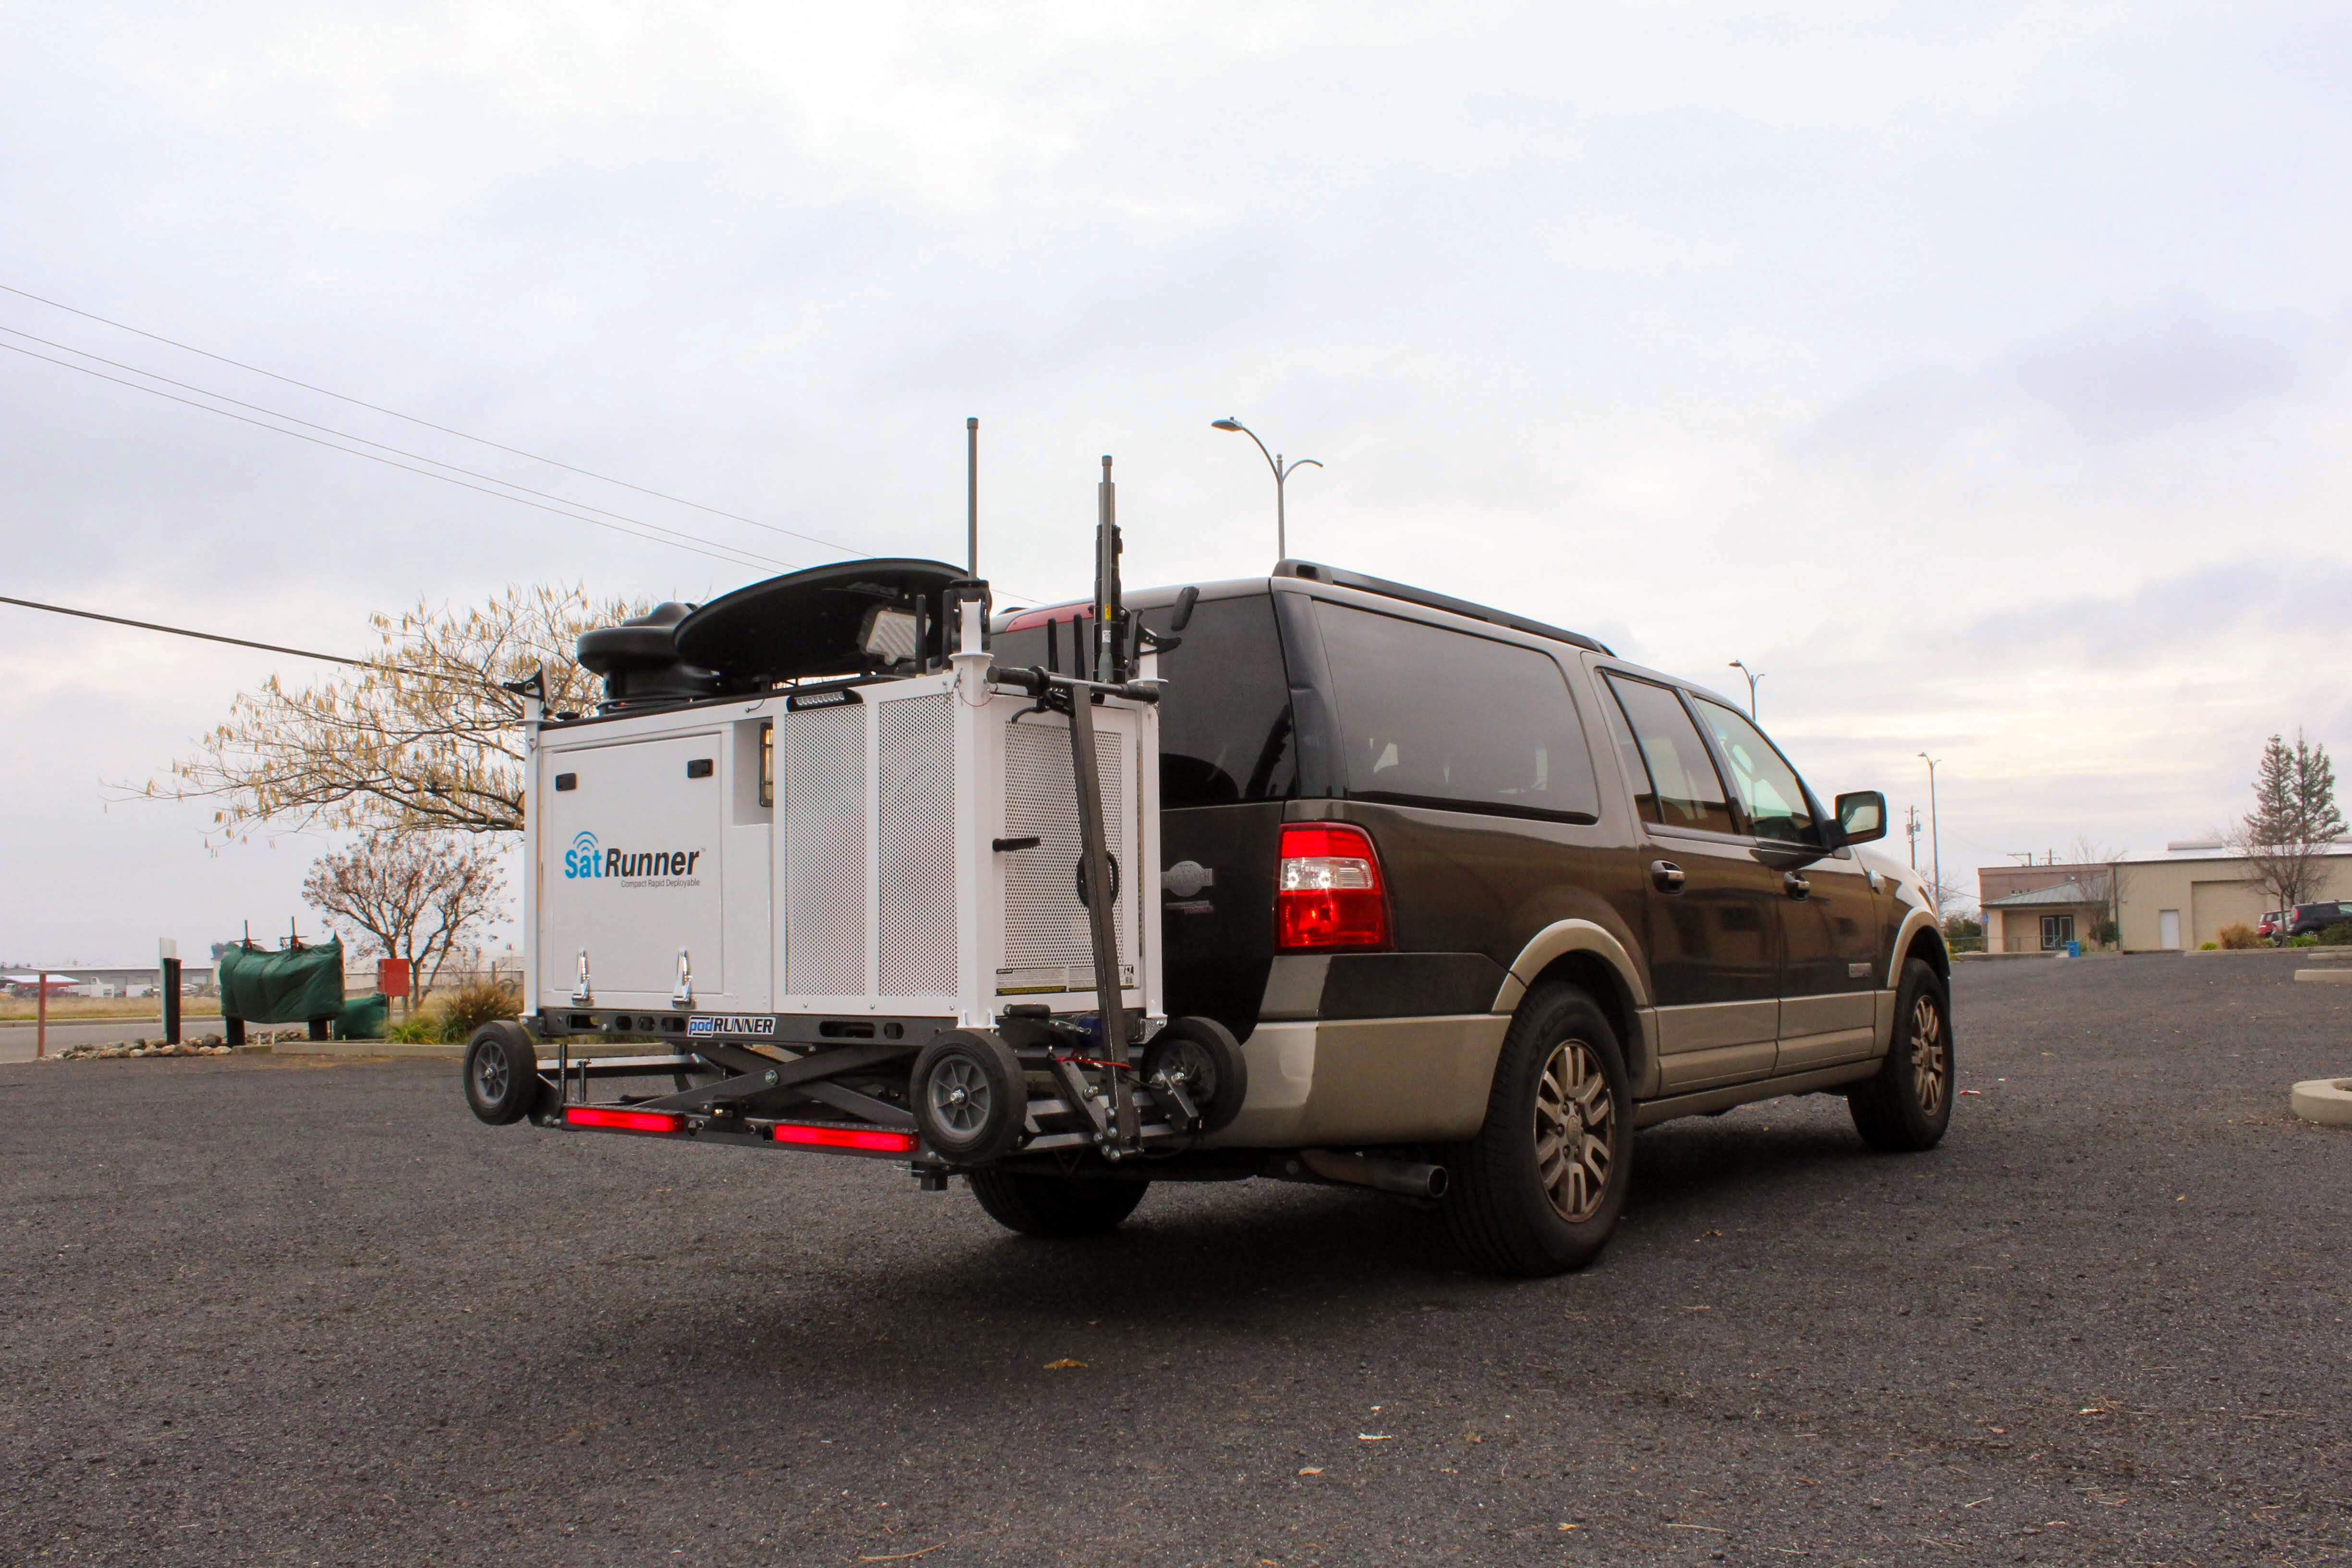 SatRunner loaded up on the back of a SUV - Perspective